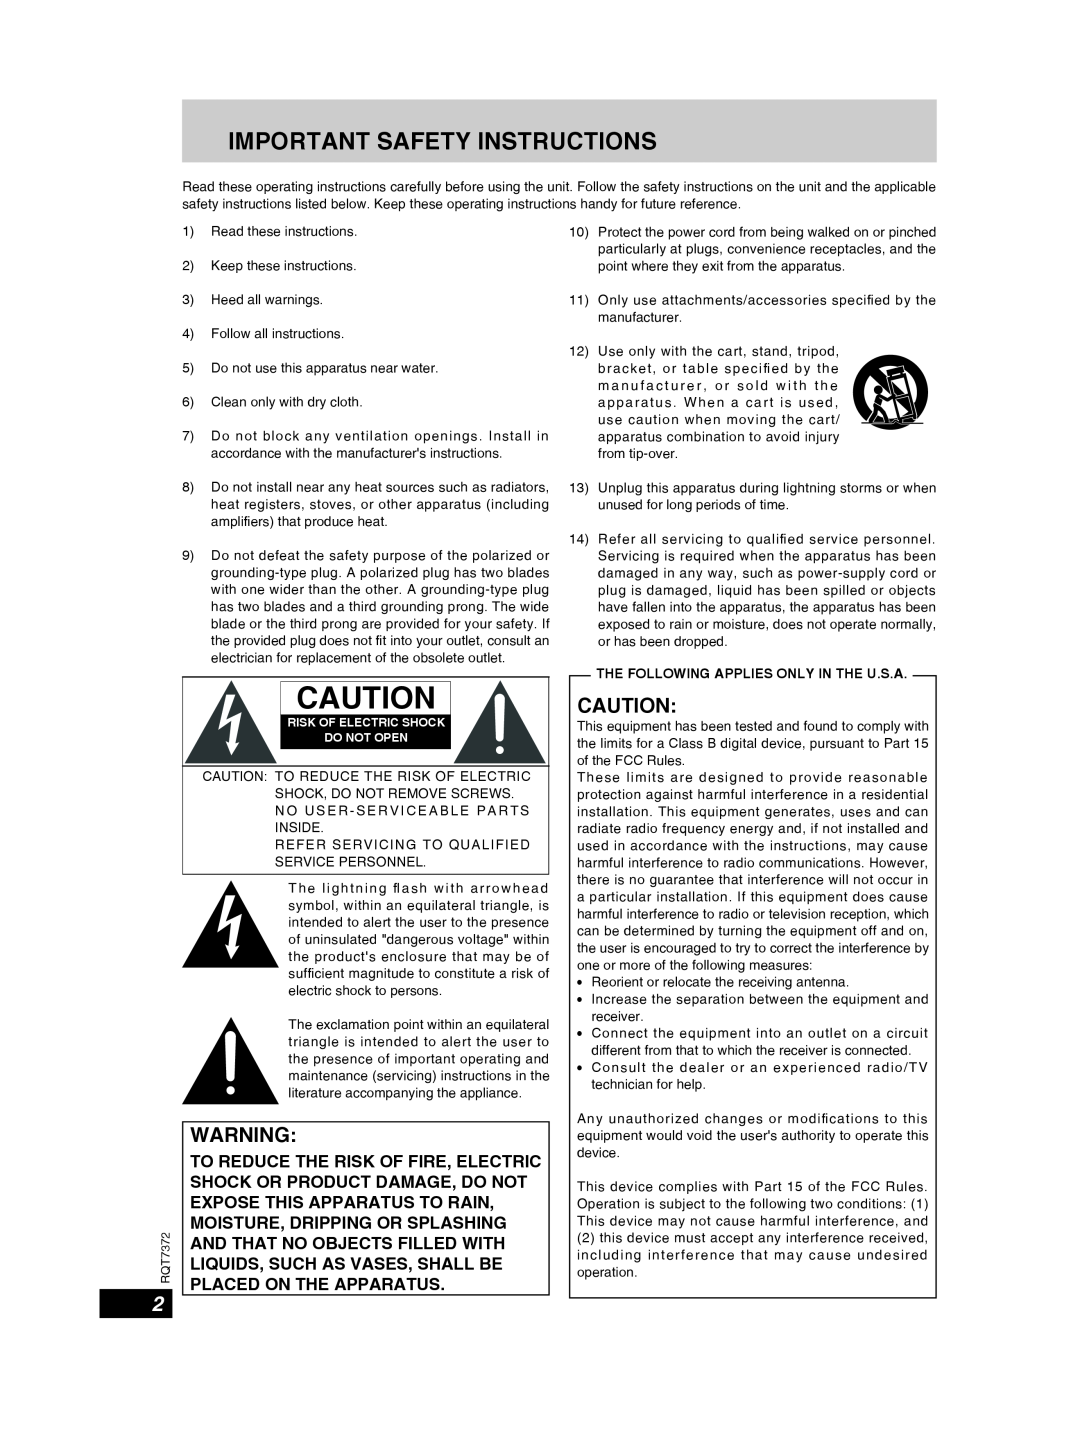 Panasonic SC-PM29 important safety instructions The Following Applies Only In The U.S.A, Important Safety Instructions 